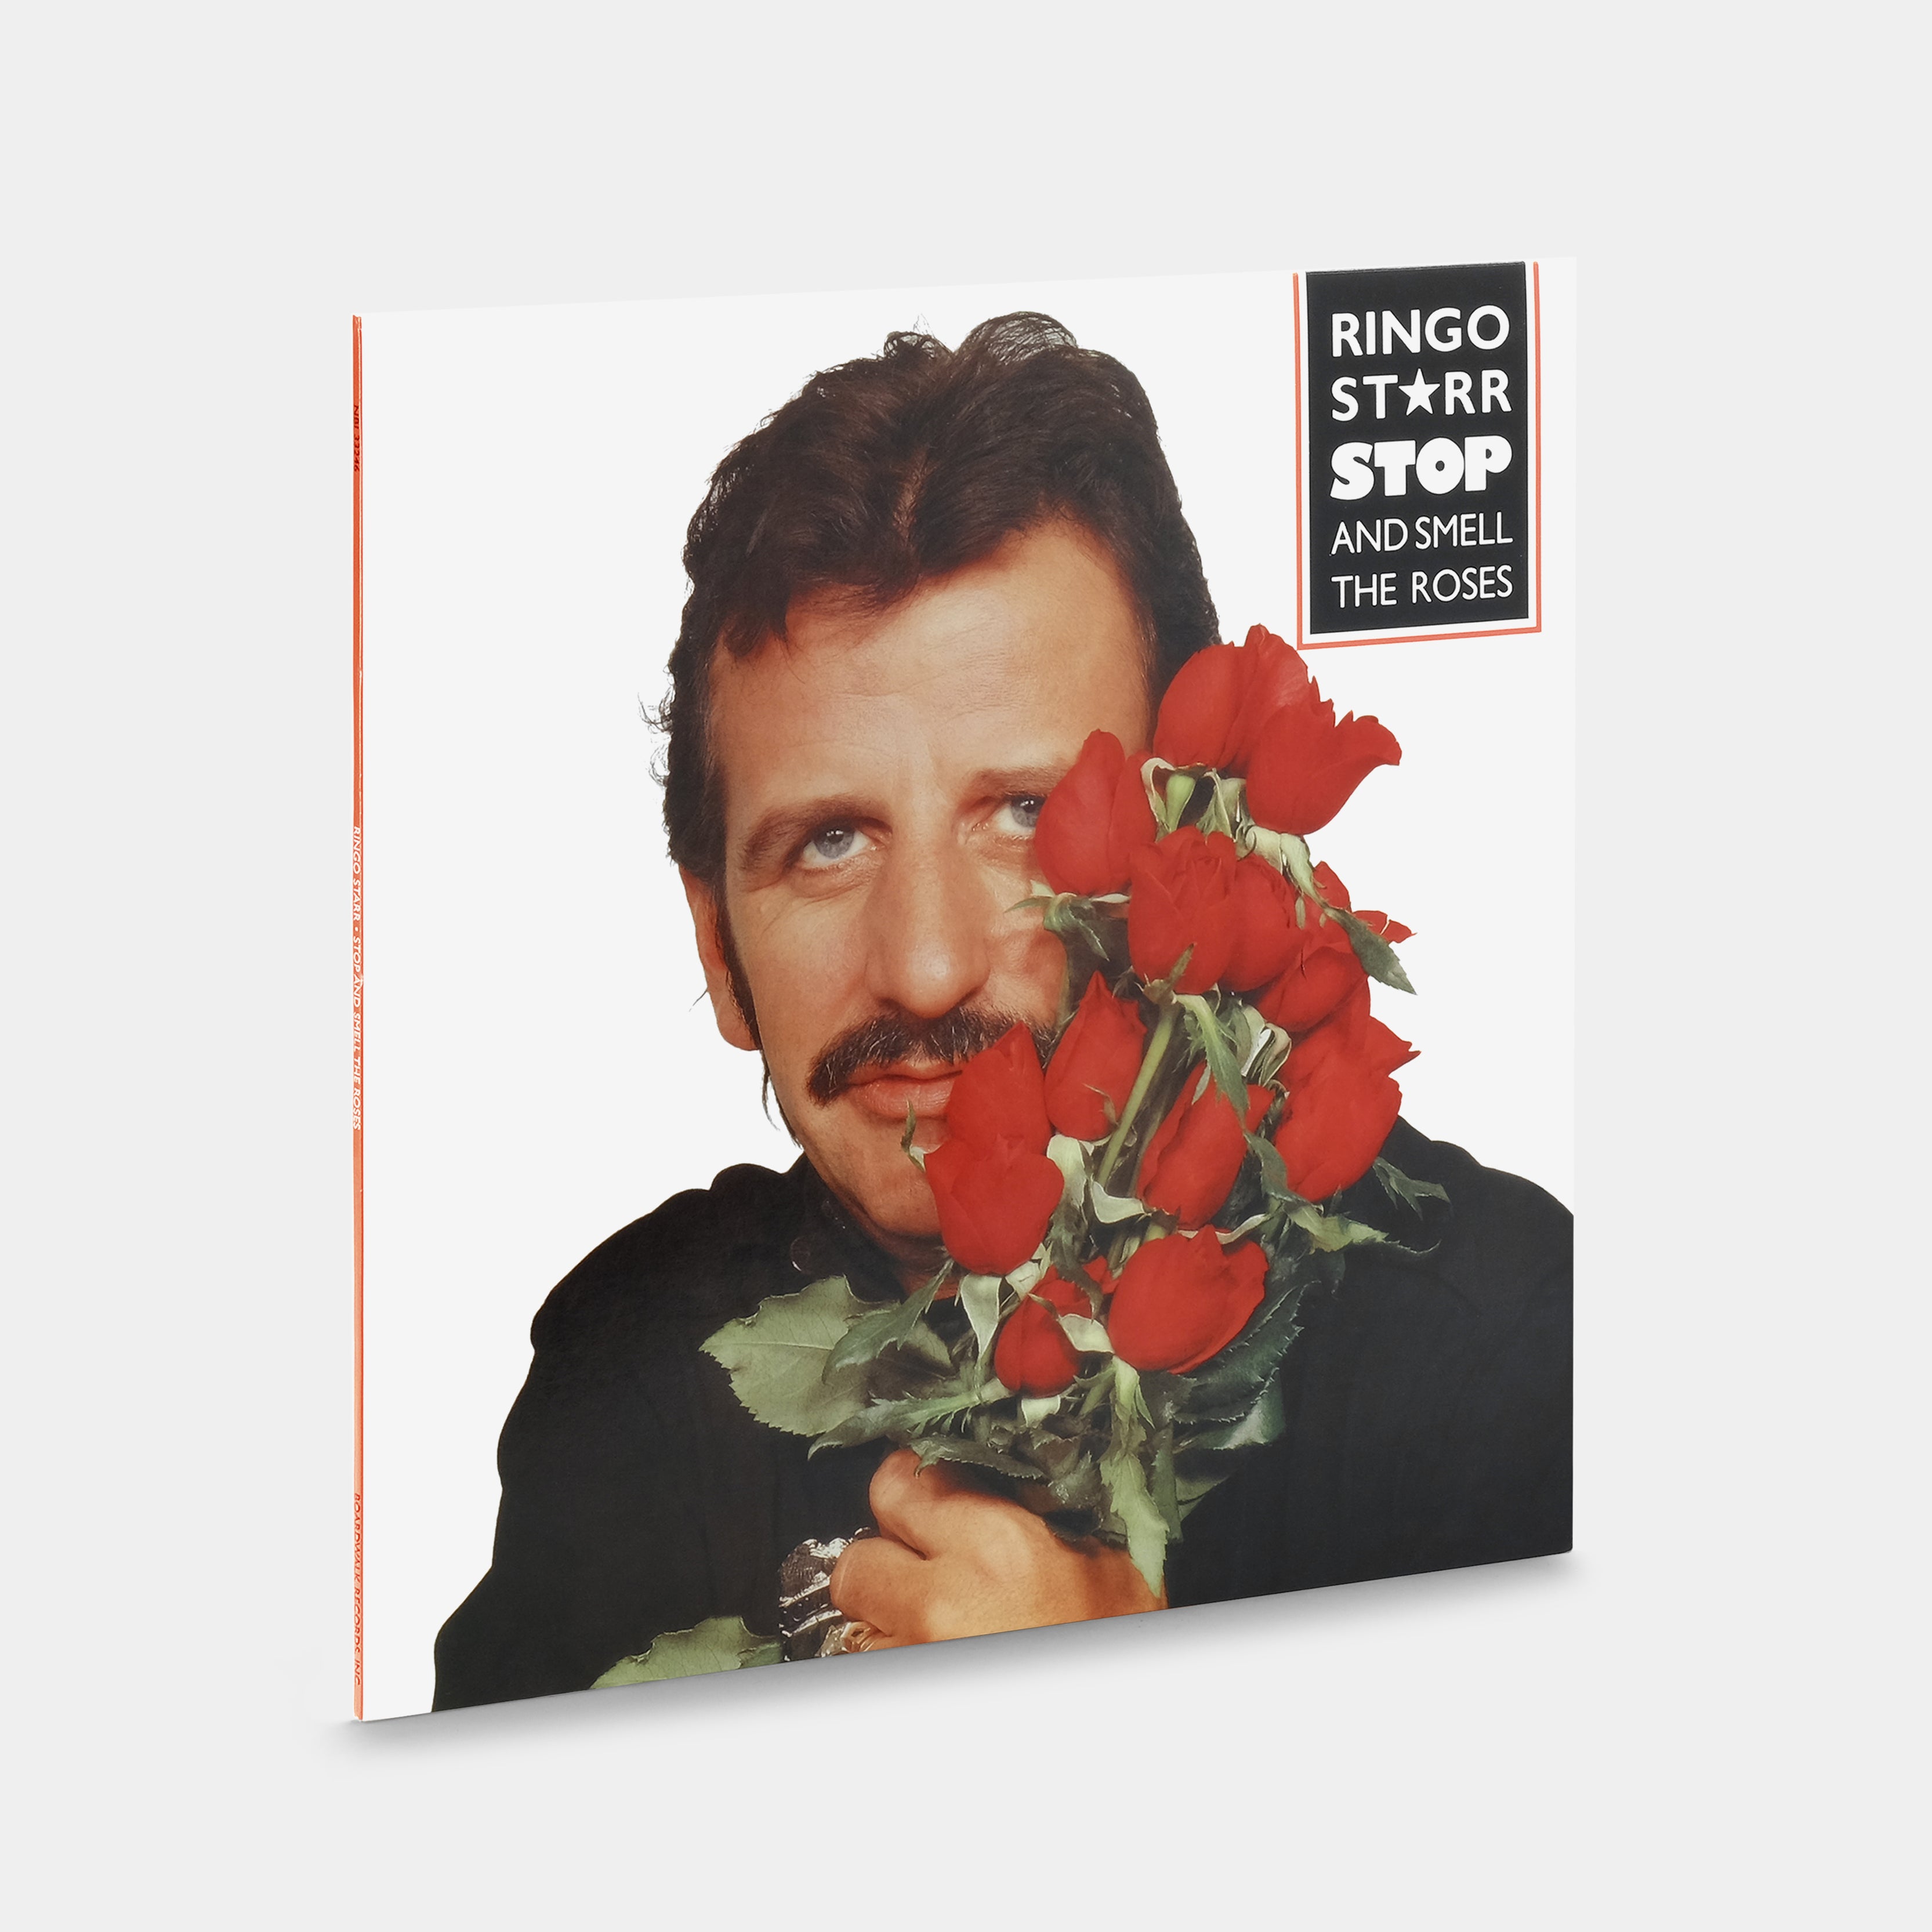 Ringo Starr - Stop And Smell The Roses LP Vinyl Record